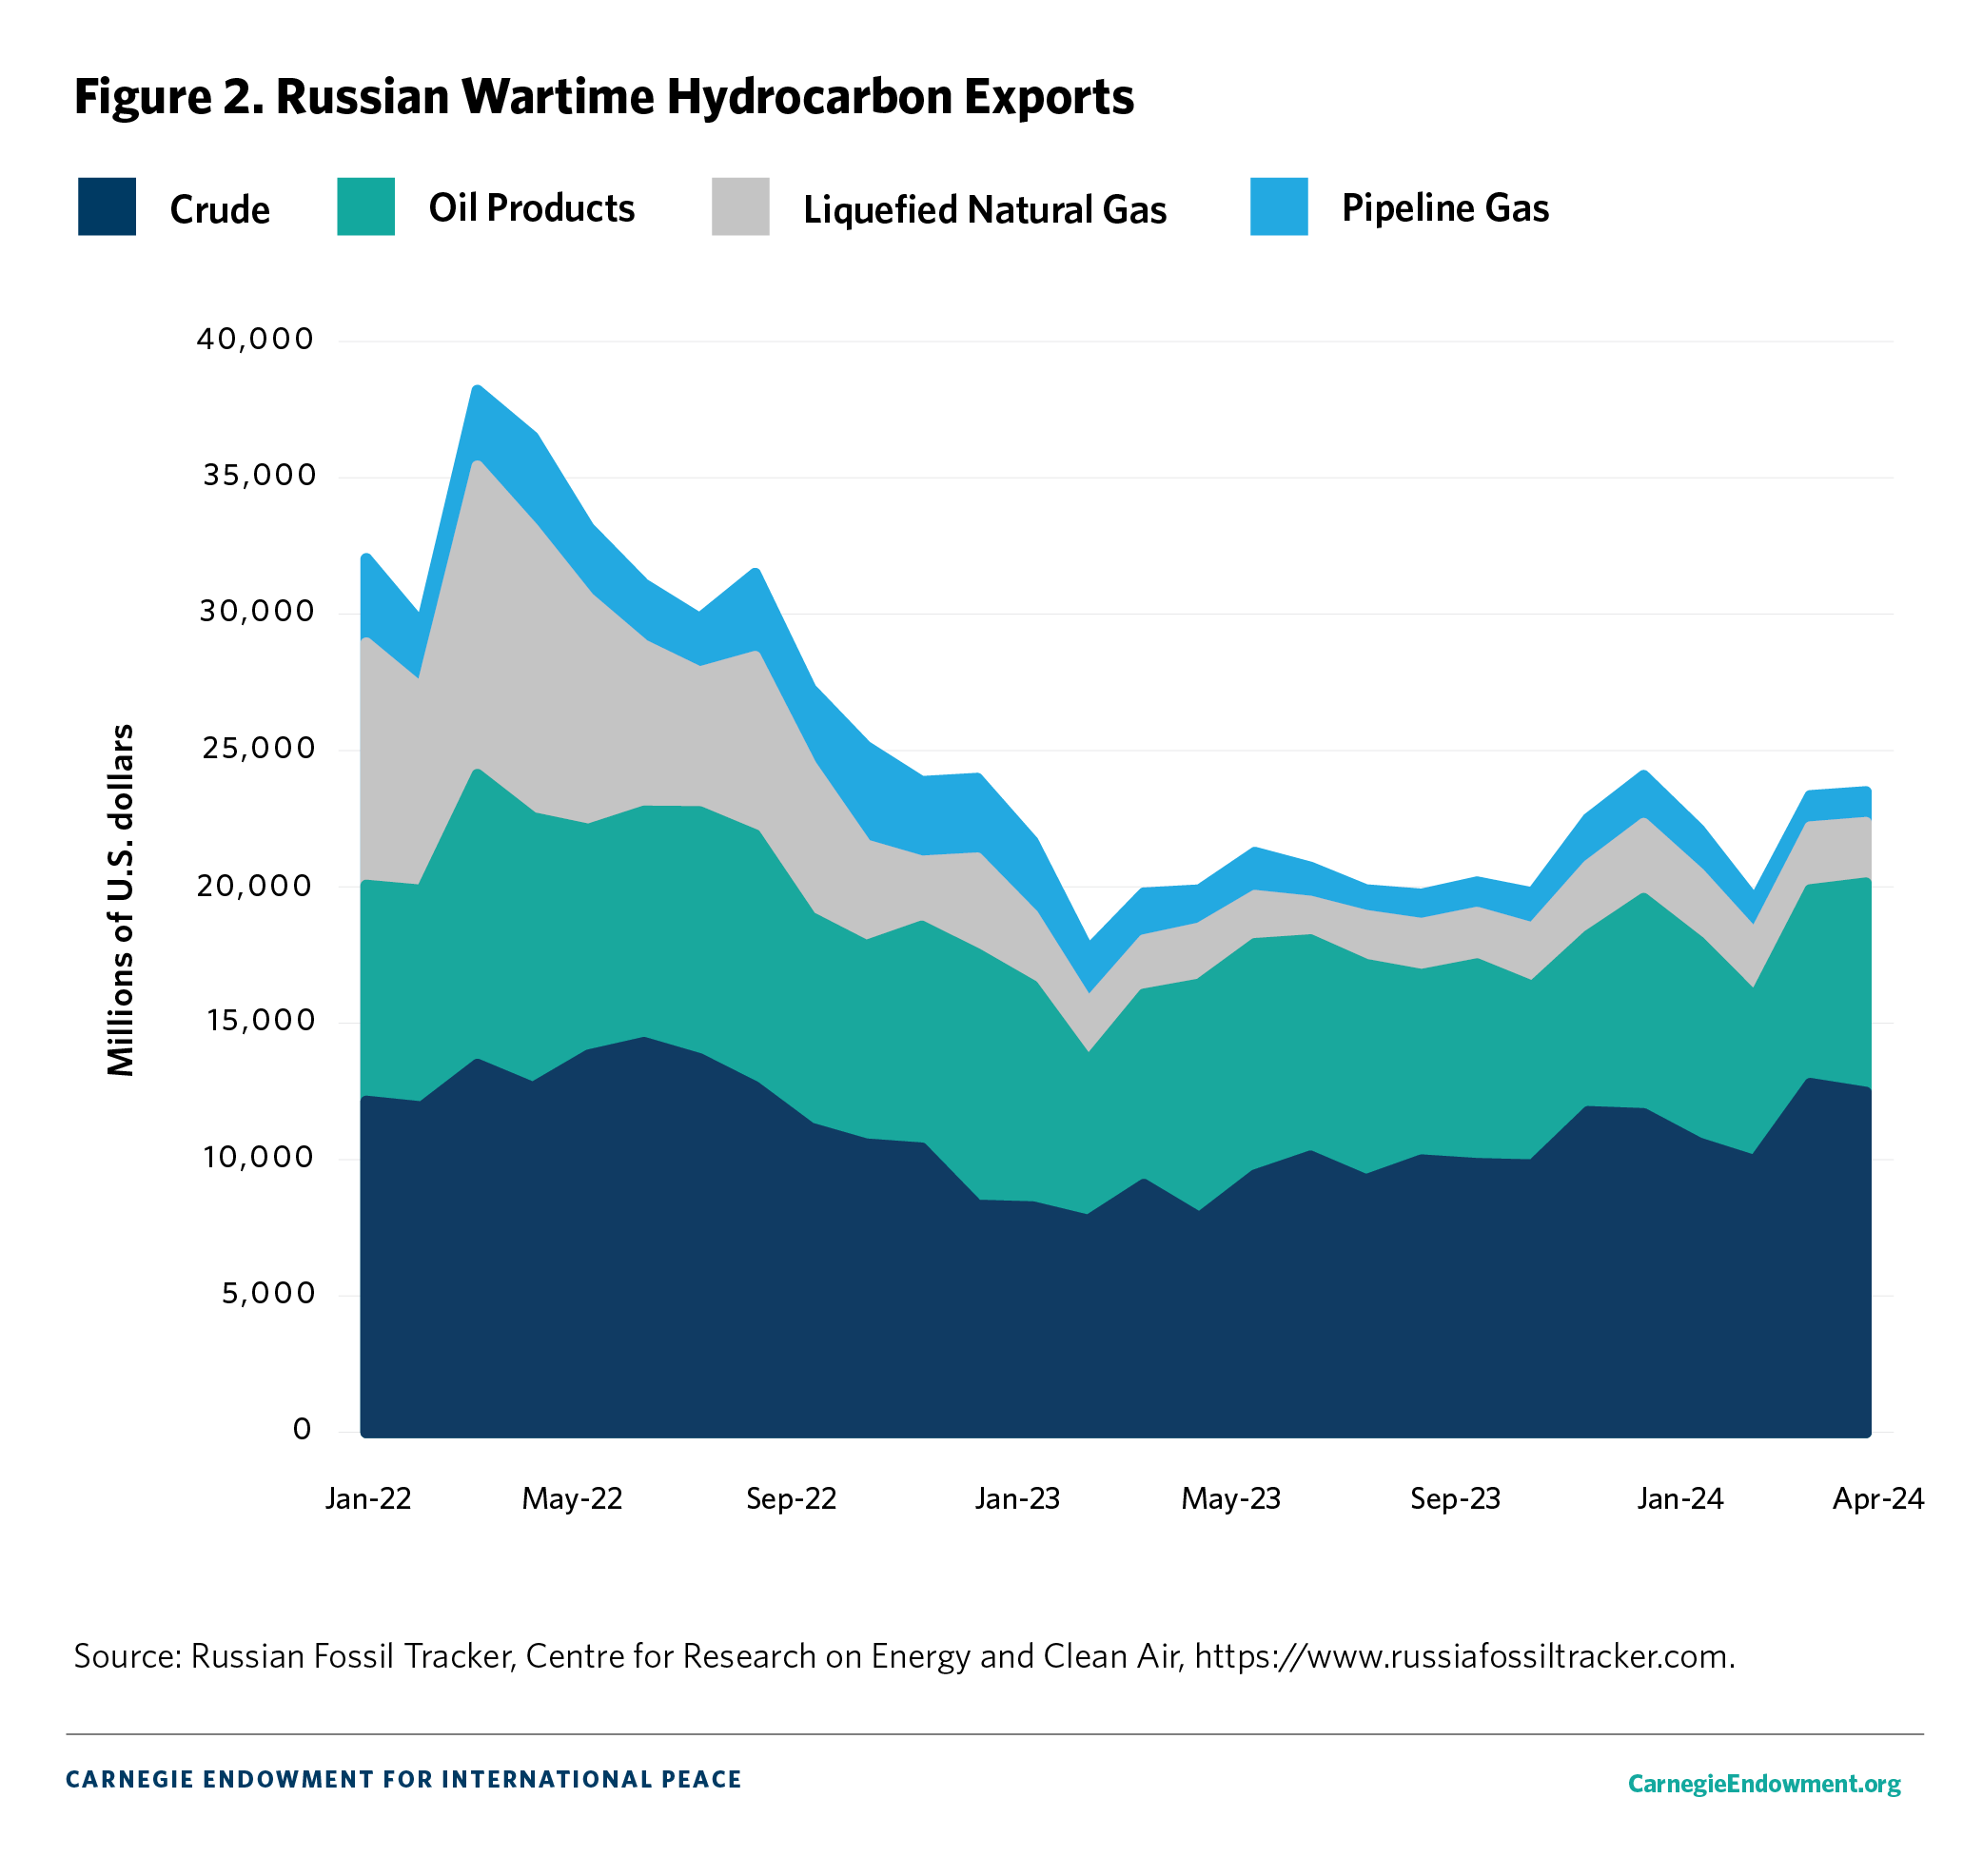 Russian Wartime Hydrocarbons Exports